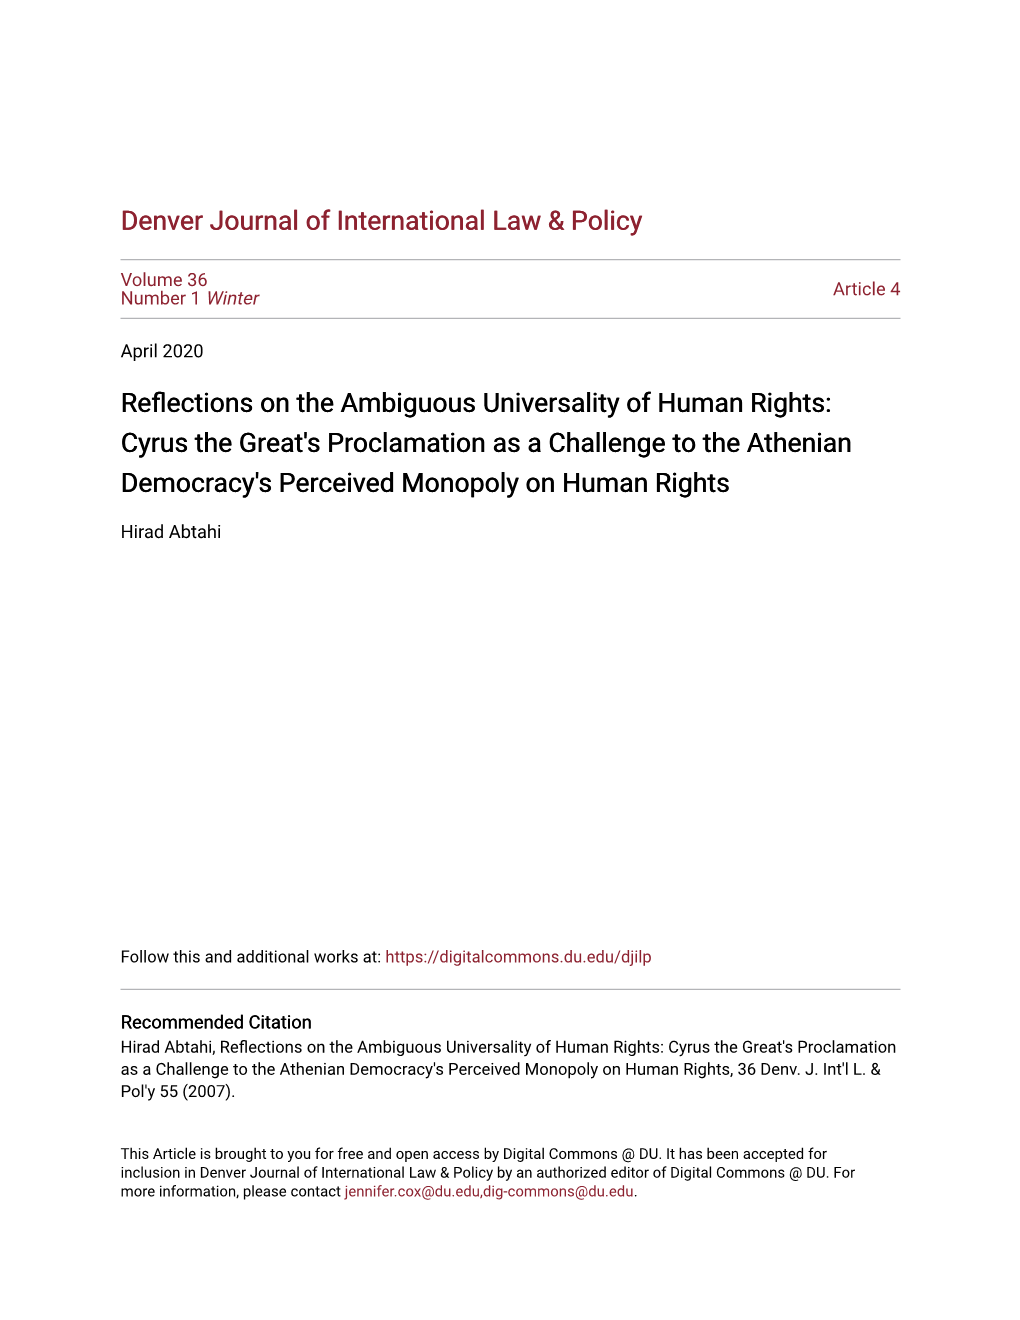 Reflections on the Ambiguous Universality of Human Rights